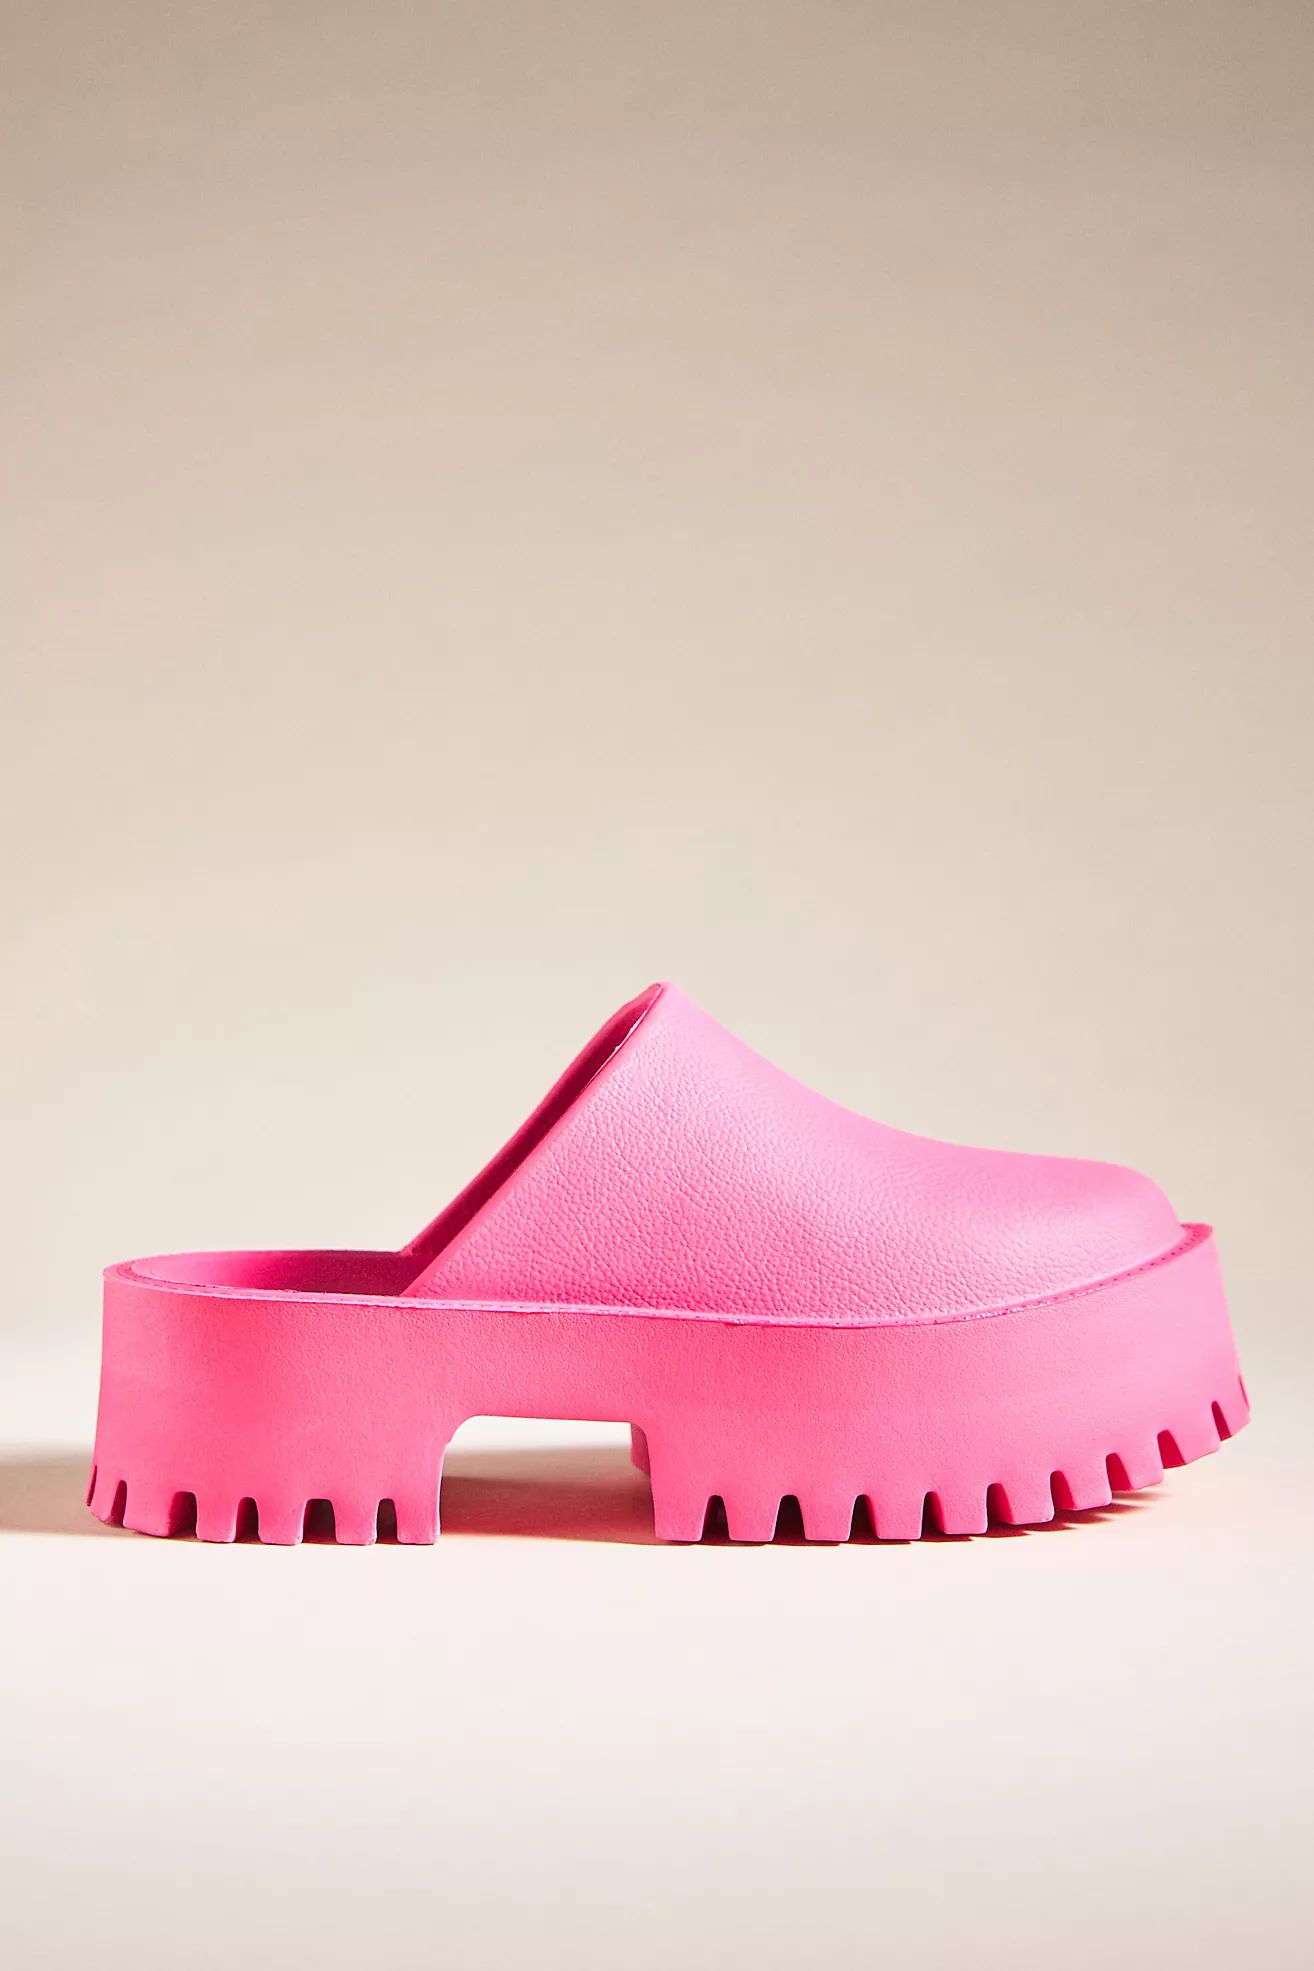 Jeffrey Campbell Clogge Clogs | Anthropologie (US)